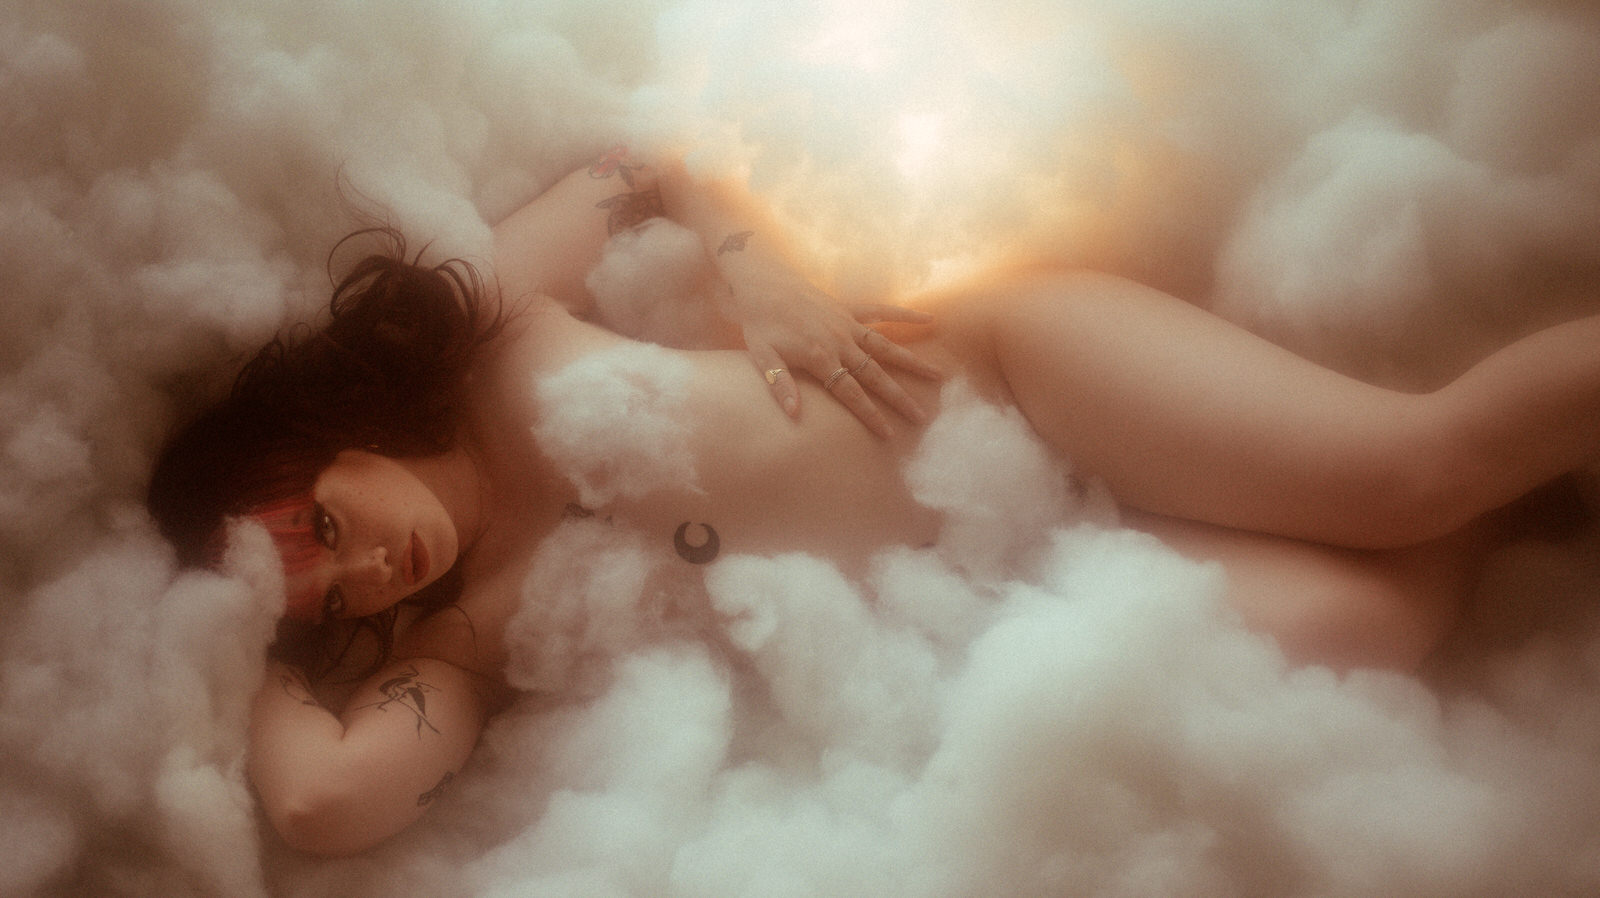 Woman posing nude in cloud photography set with lights